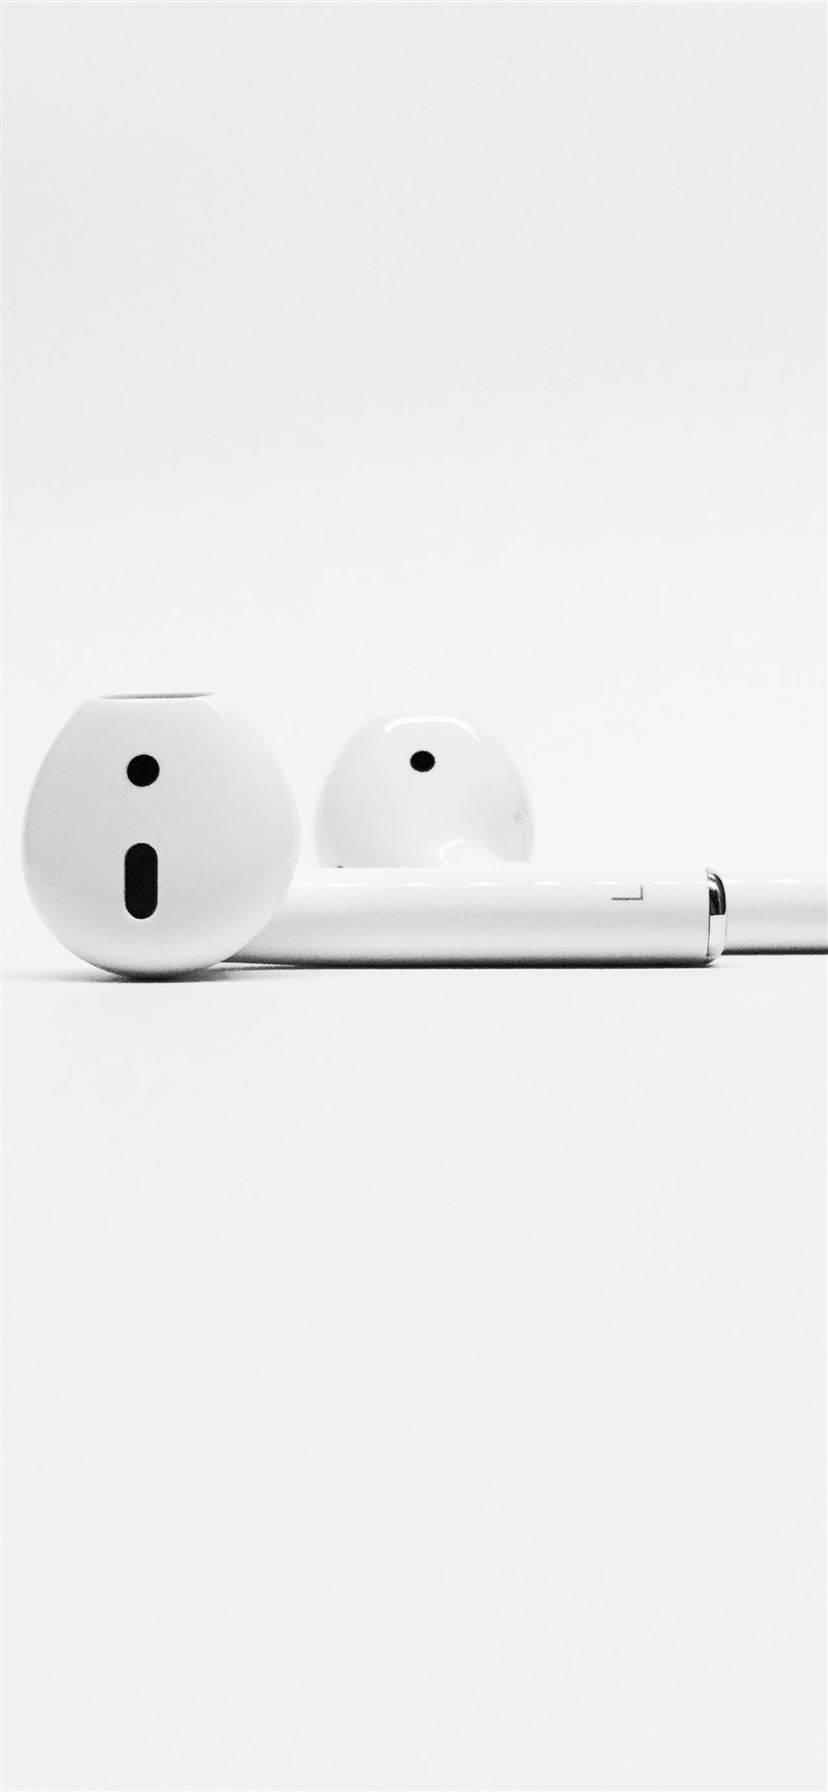 White Iphone Airpods Background